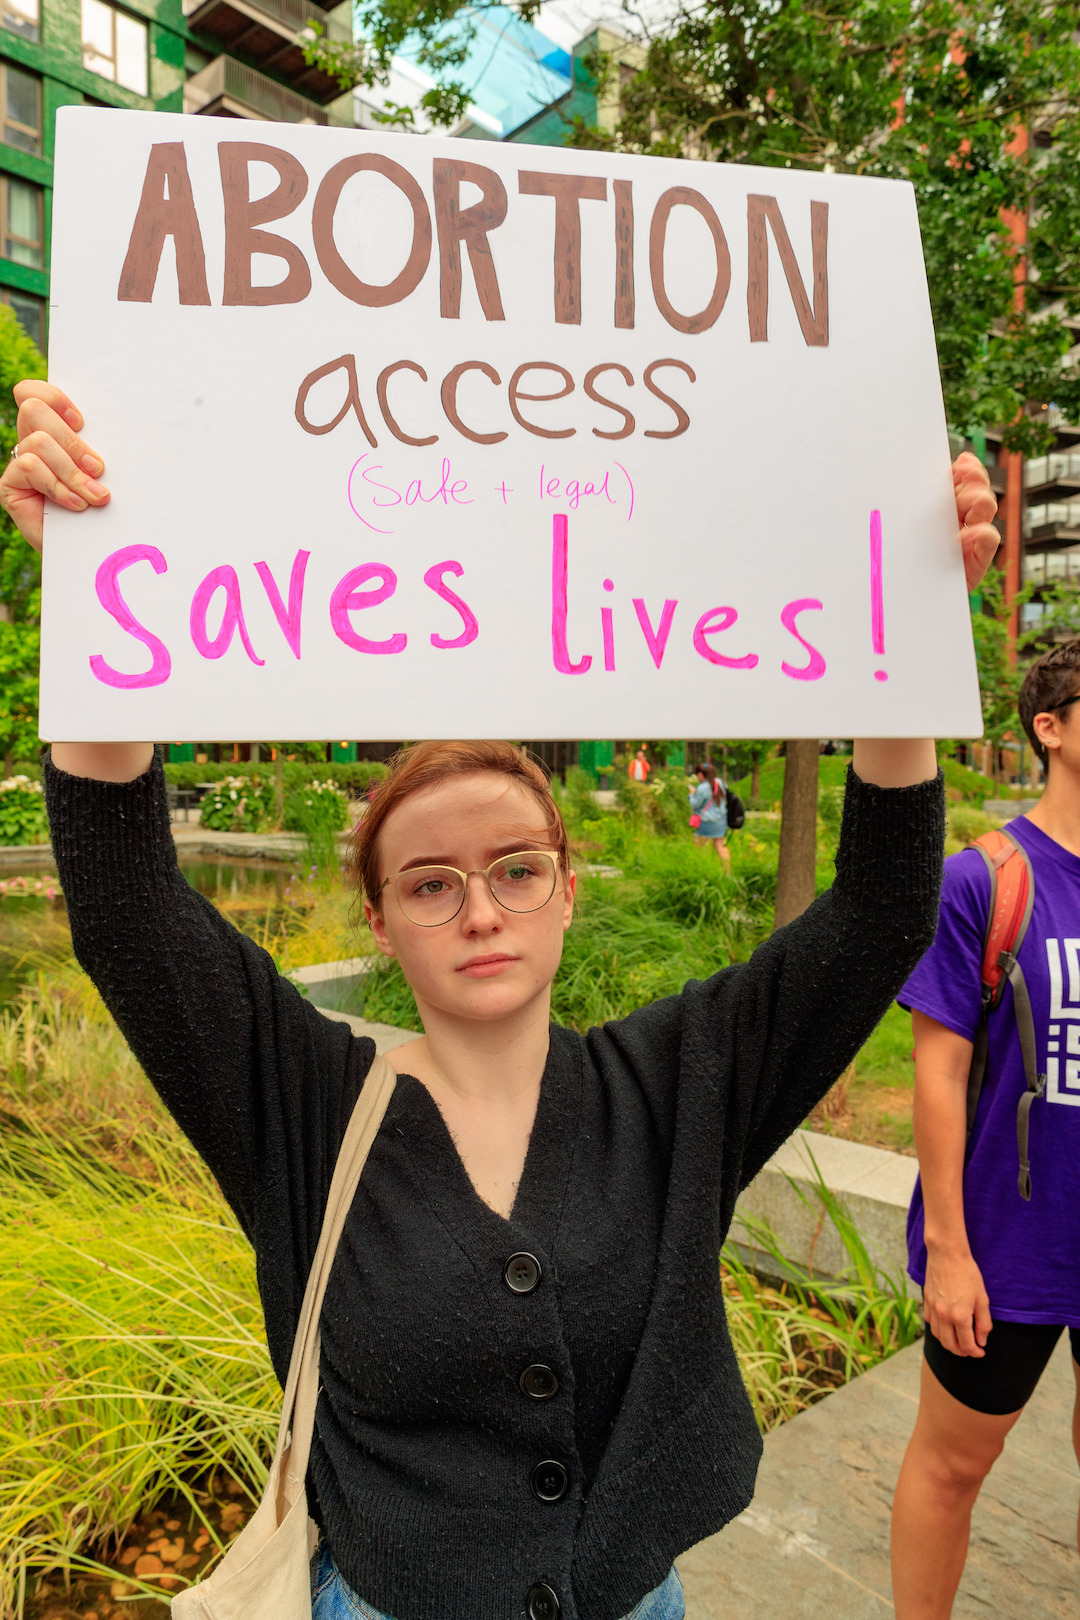 Woman holds sign that reads, "Abortion access saves lives!"